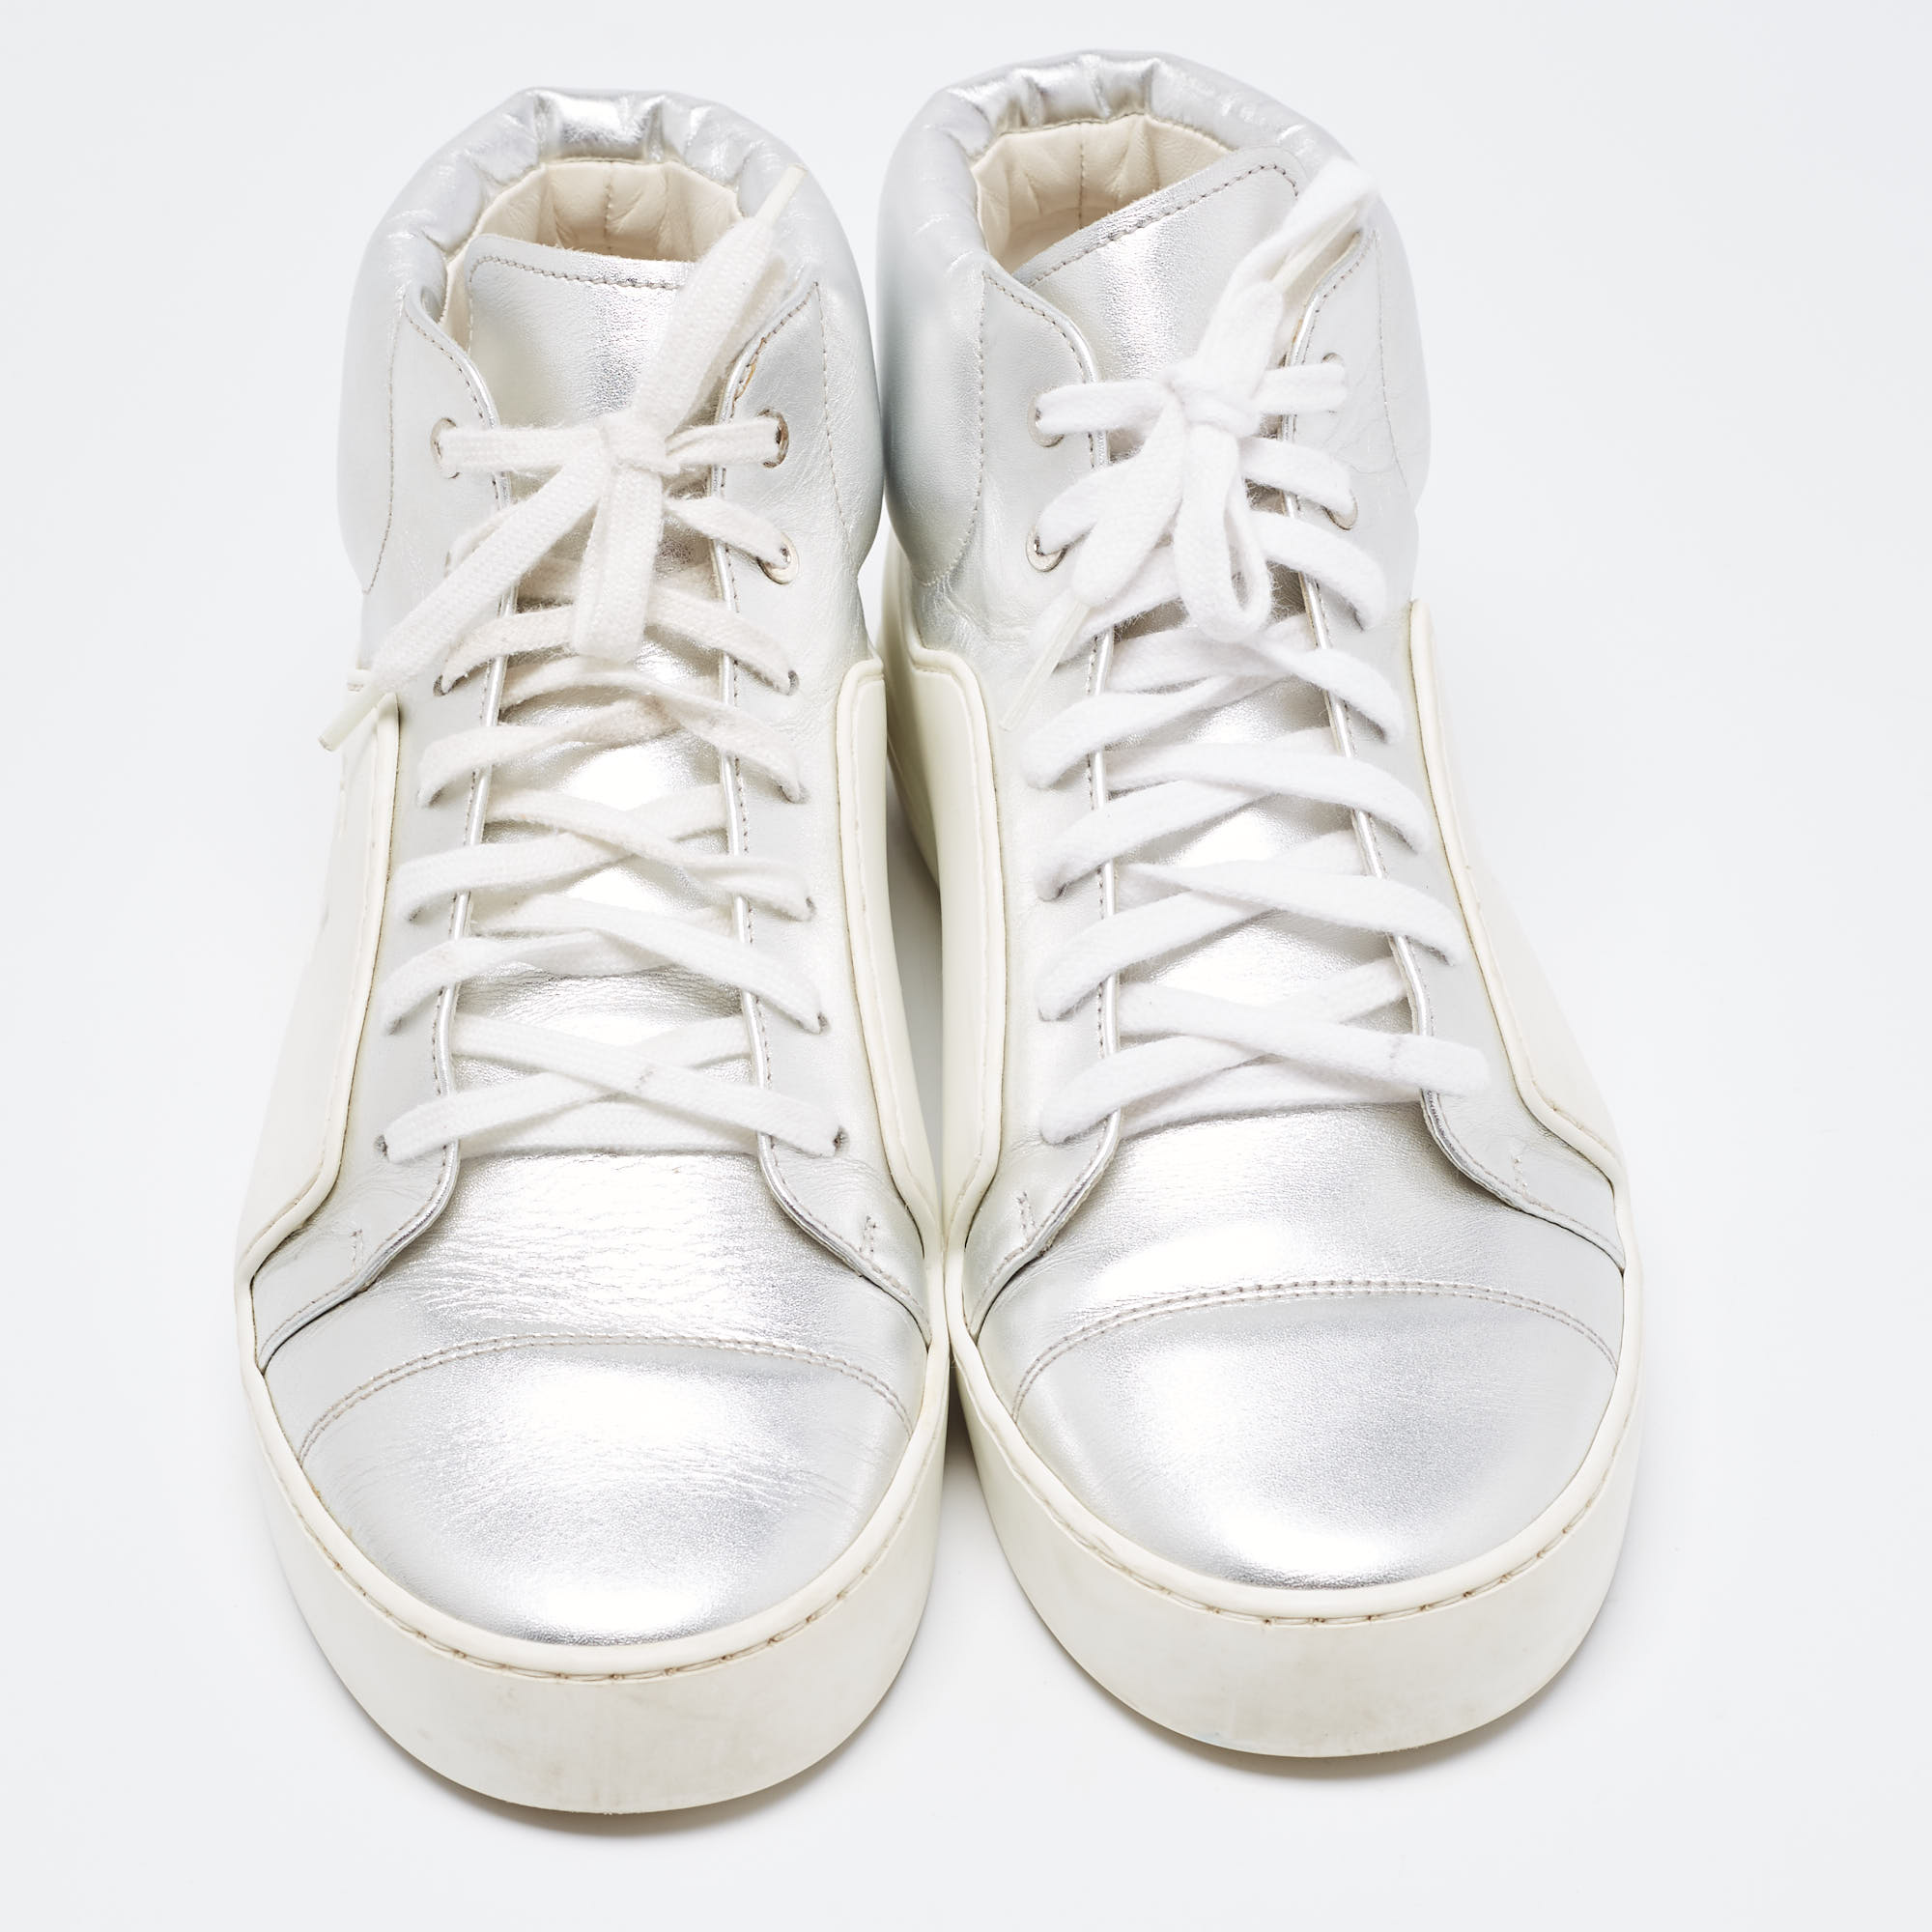 Chanel Metallic Silver/White Leather And Rubber Lace Up High Top Sneakers Size 39.5